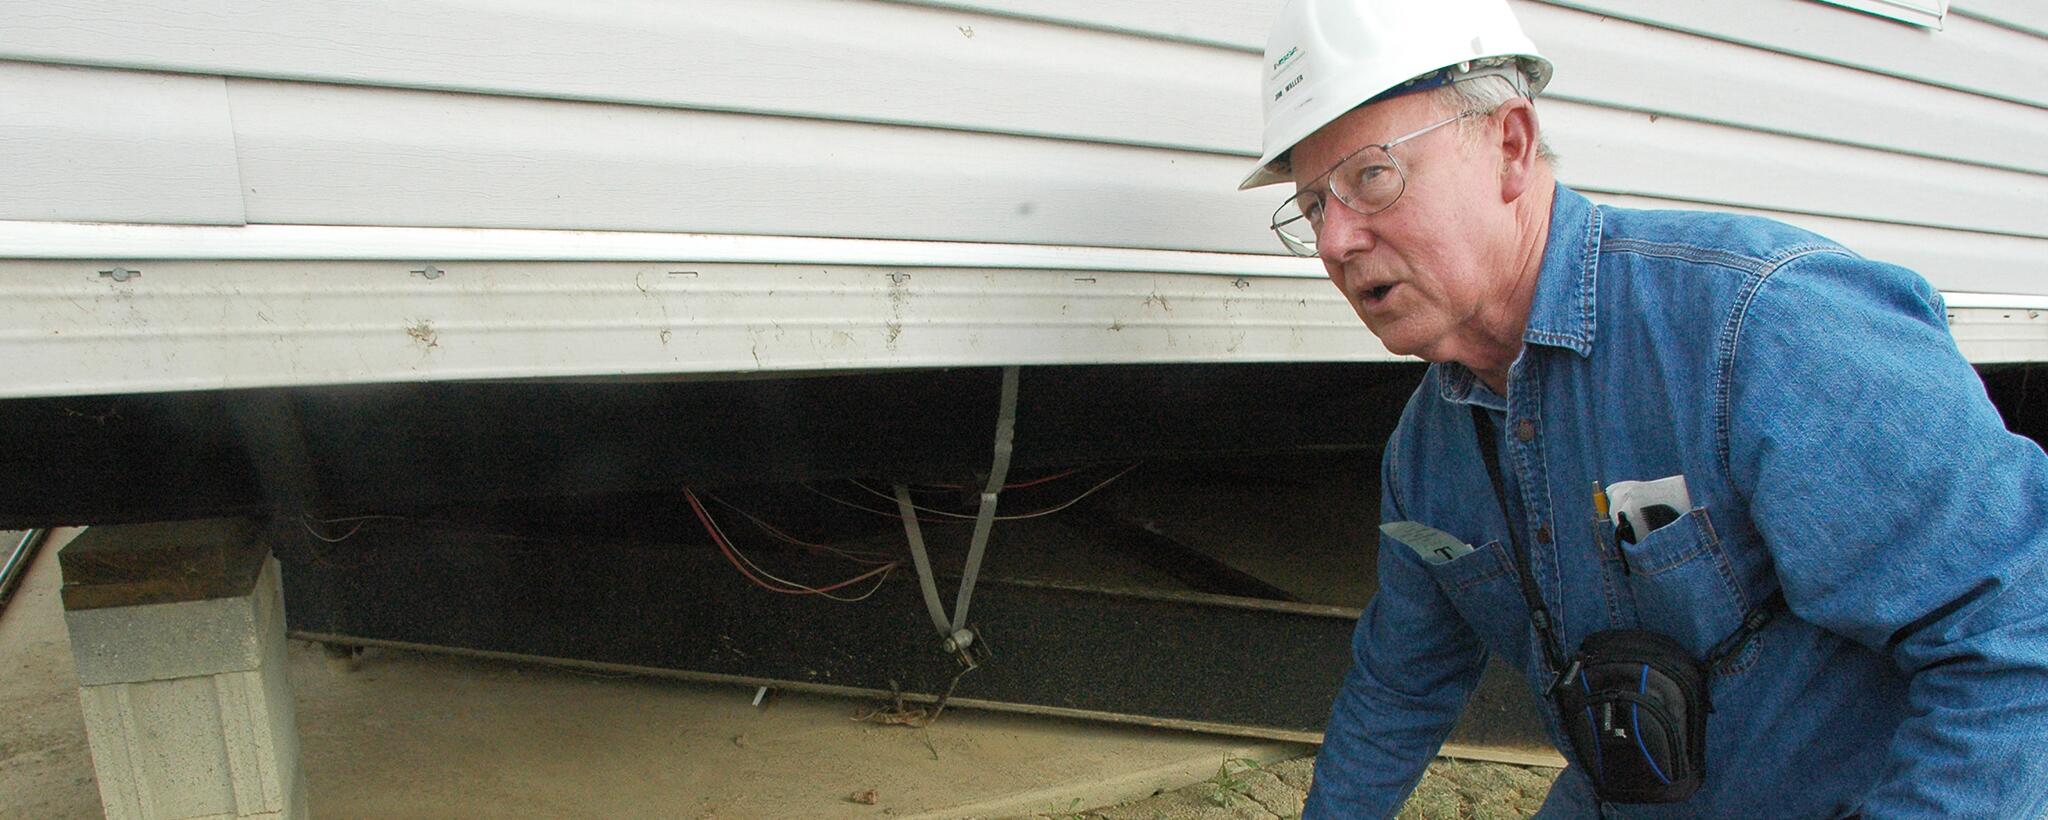 A researcher from Texas Tech University's Wind Science Research Center looks at mobile home tie-downs to help develop safer structures.